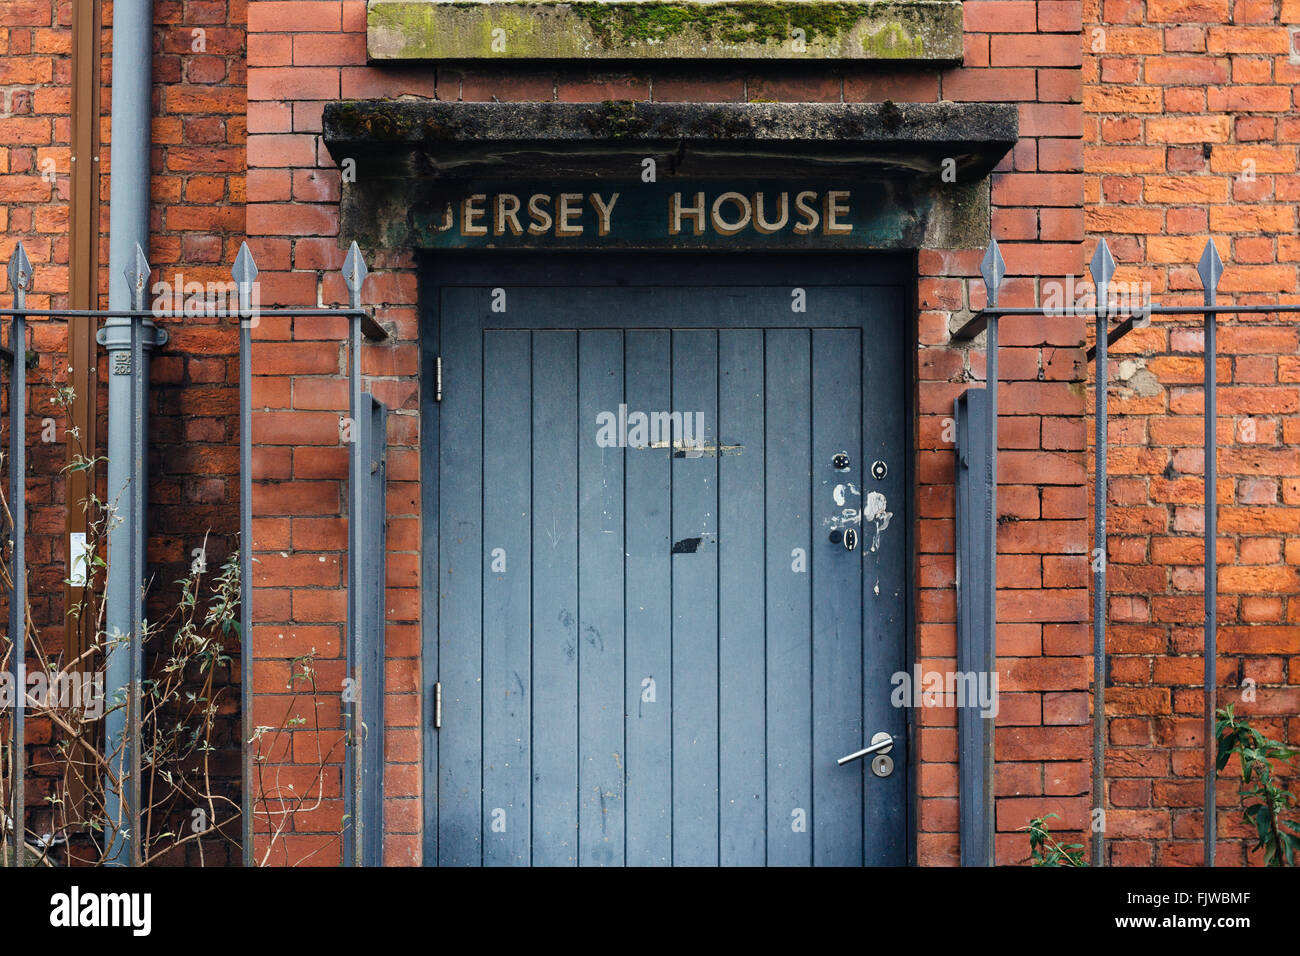 Jersey House. Old front door, Ancoats. Manchester. England. Stock Photo